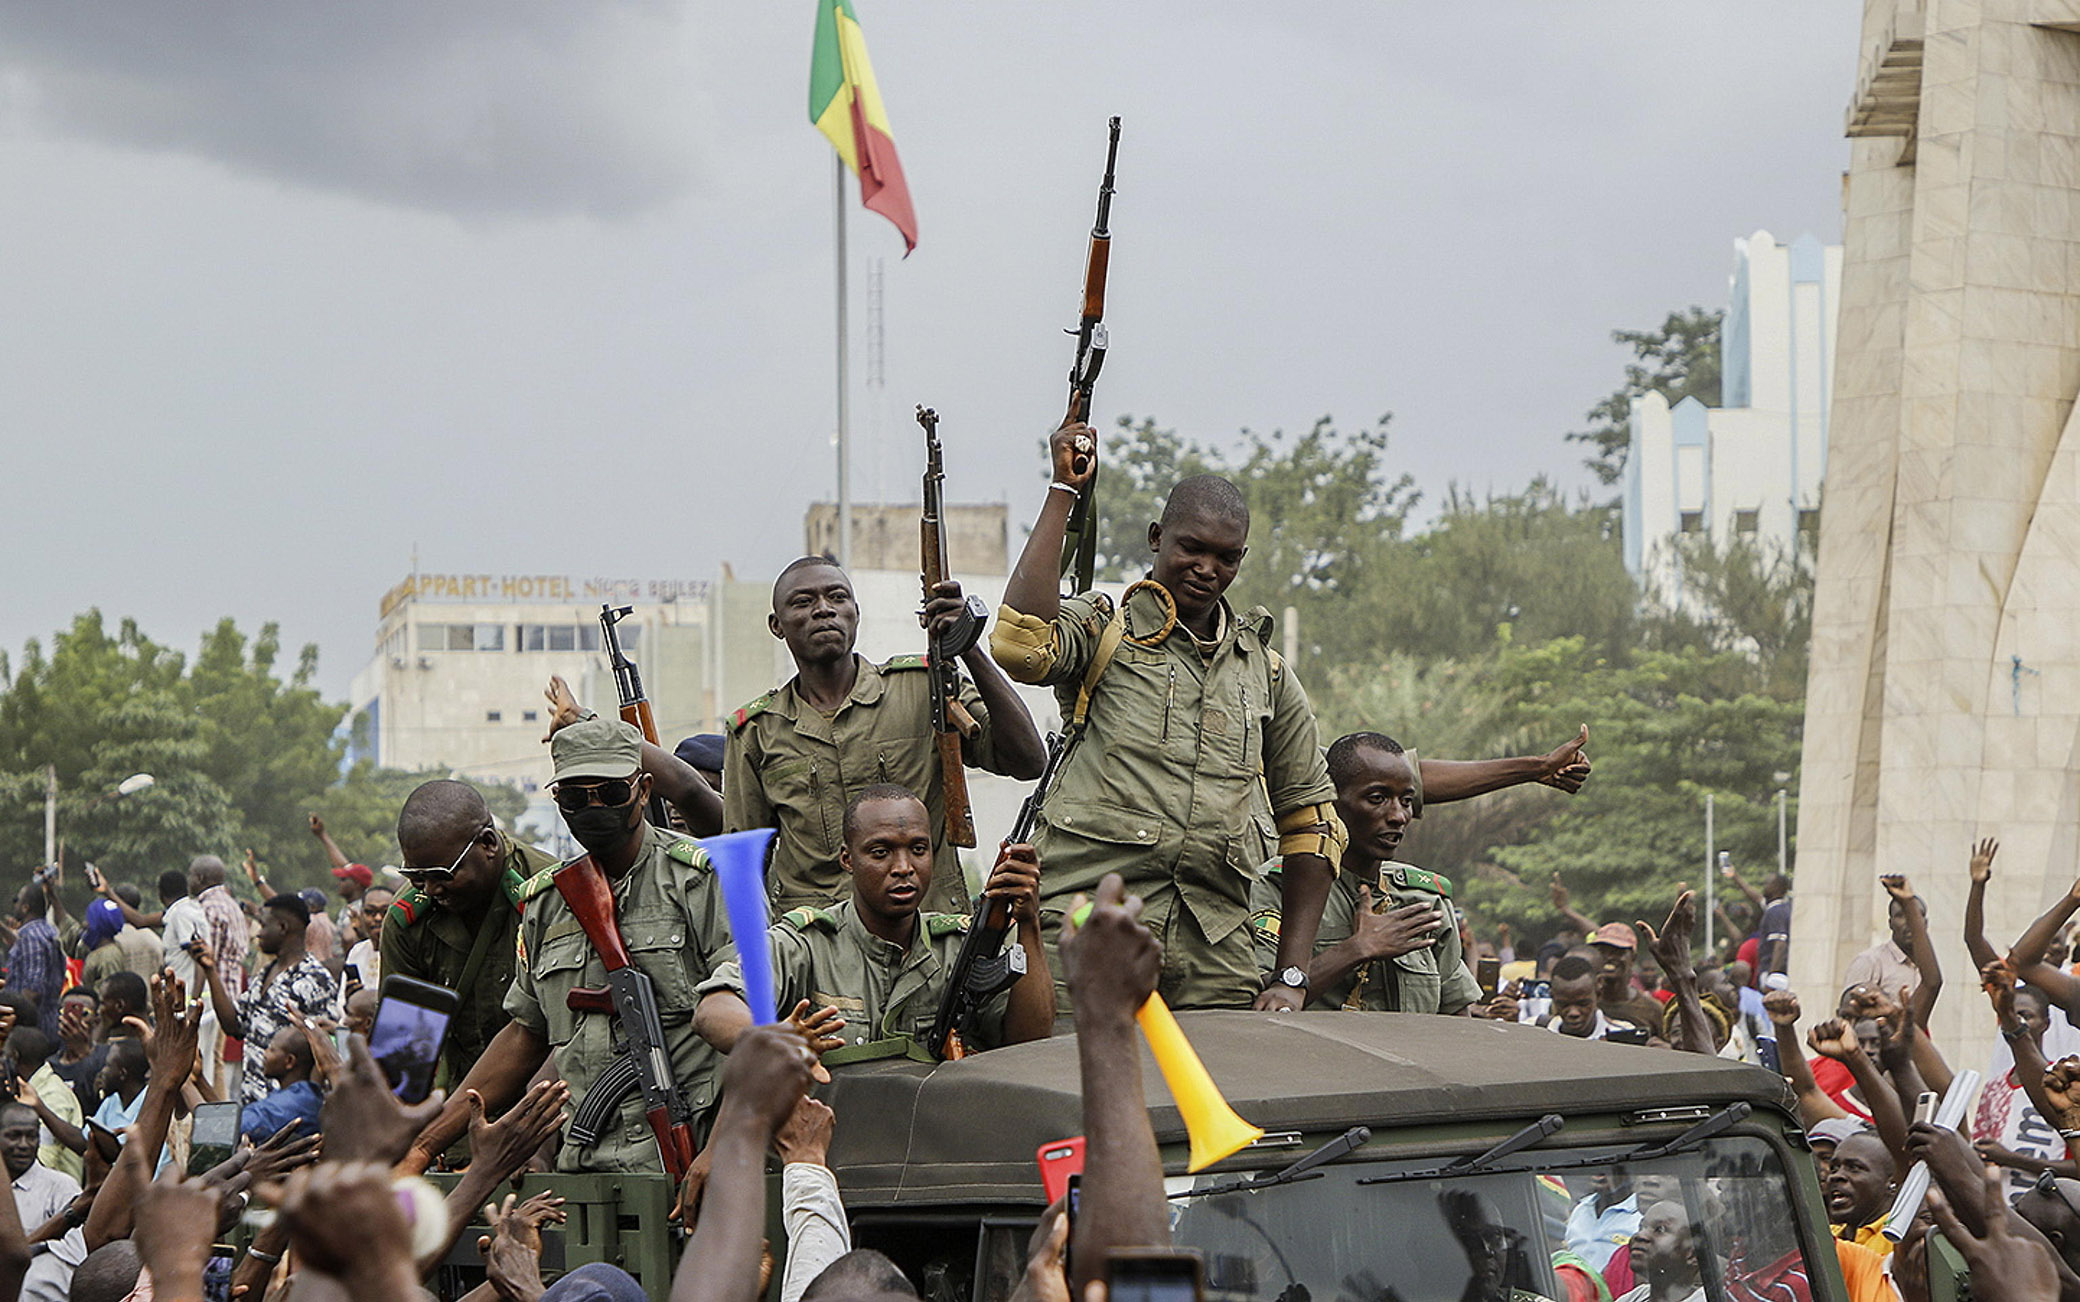 epa08611367 Malians cheer as Mali military enter the streets of Bamako, Mali, 18 August 2020. Local reports indicate Mali military have seized Mali President Ibrahim Boubakar KeÔta in what appears to be a coup attempt.  EPA/MOUSSA KALAPO